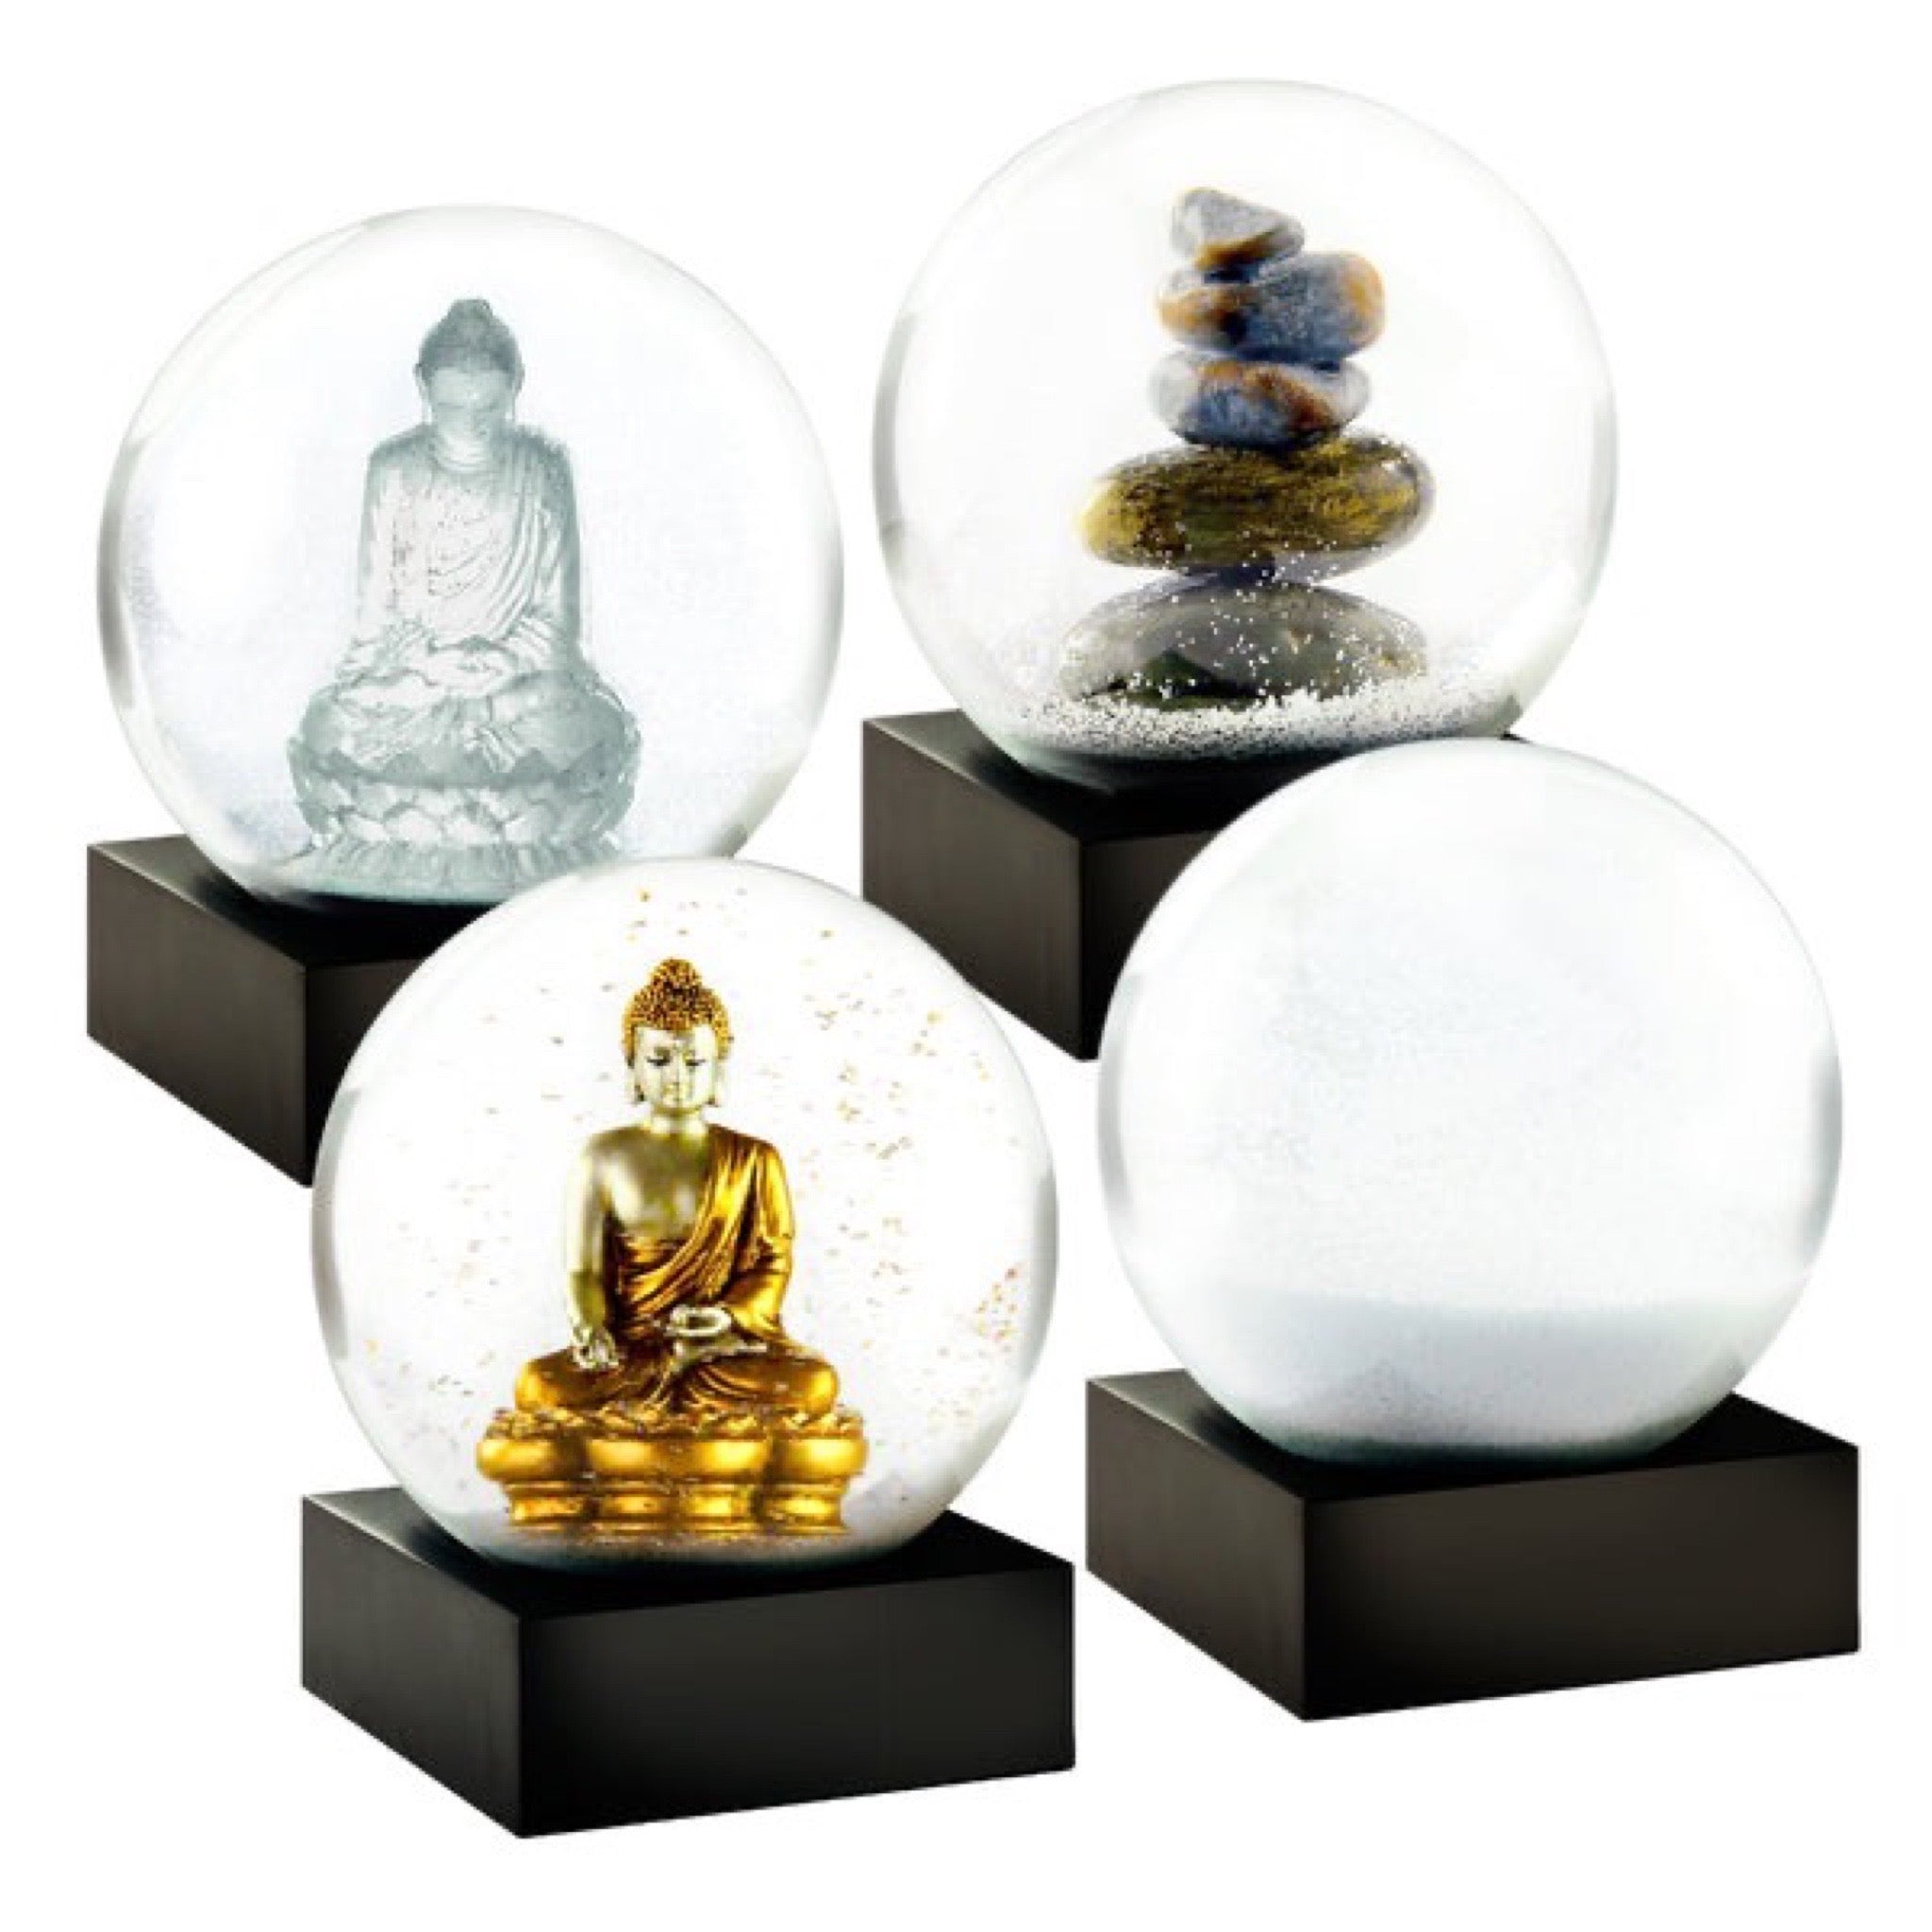 Cool Snow Globes Zen Mini Snow Globe Set available at Shaylula Jewlery & Gifts in Tarrytown, NY and online. Among our bestselling pieces, the Crystal and Gold Buddhas, Cairn, and Snowball snow globes have each provided a source of tranquility to those who have watched their quiet movement. Now, together in miniature, they join to create a remarkably meditative and soothing force.  • 1.75" W x 2.25" H